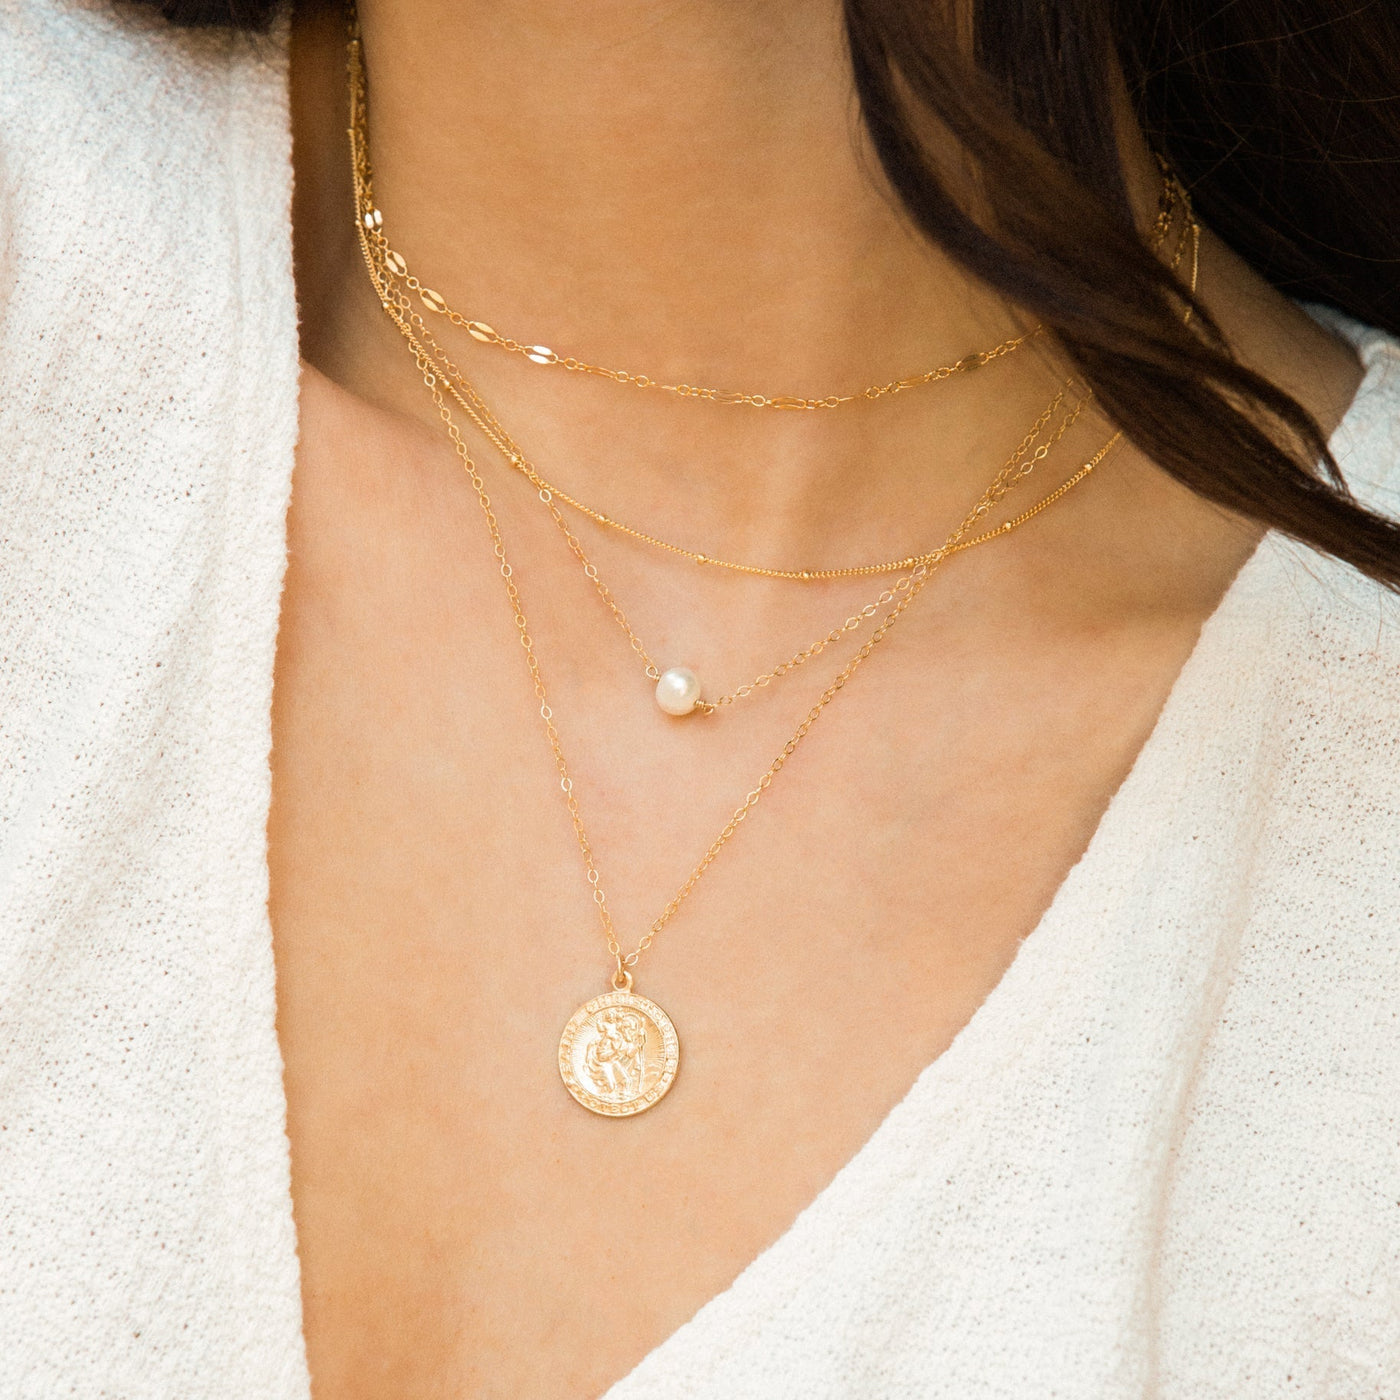 St. Christopher Medallion Necklace | Simple & Dainty Jewelry